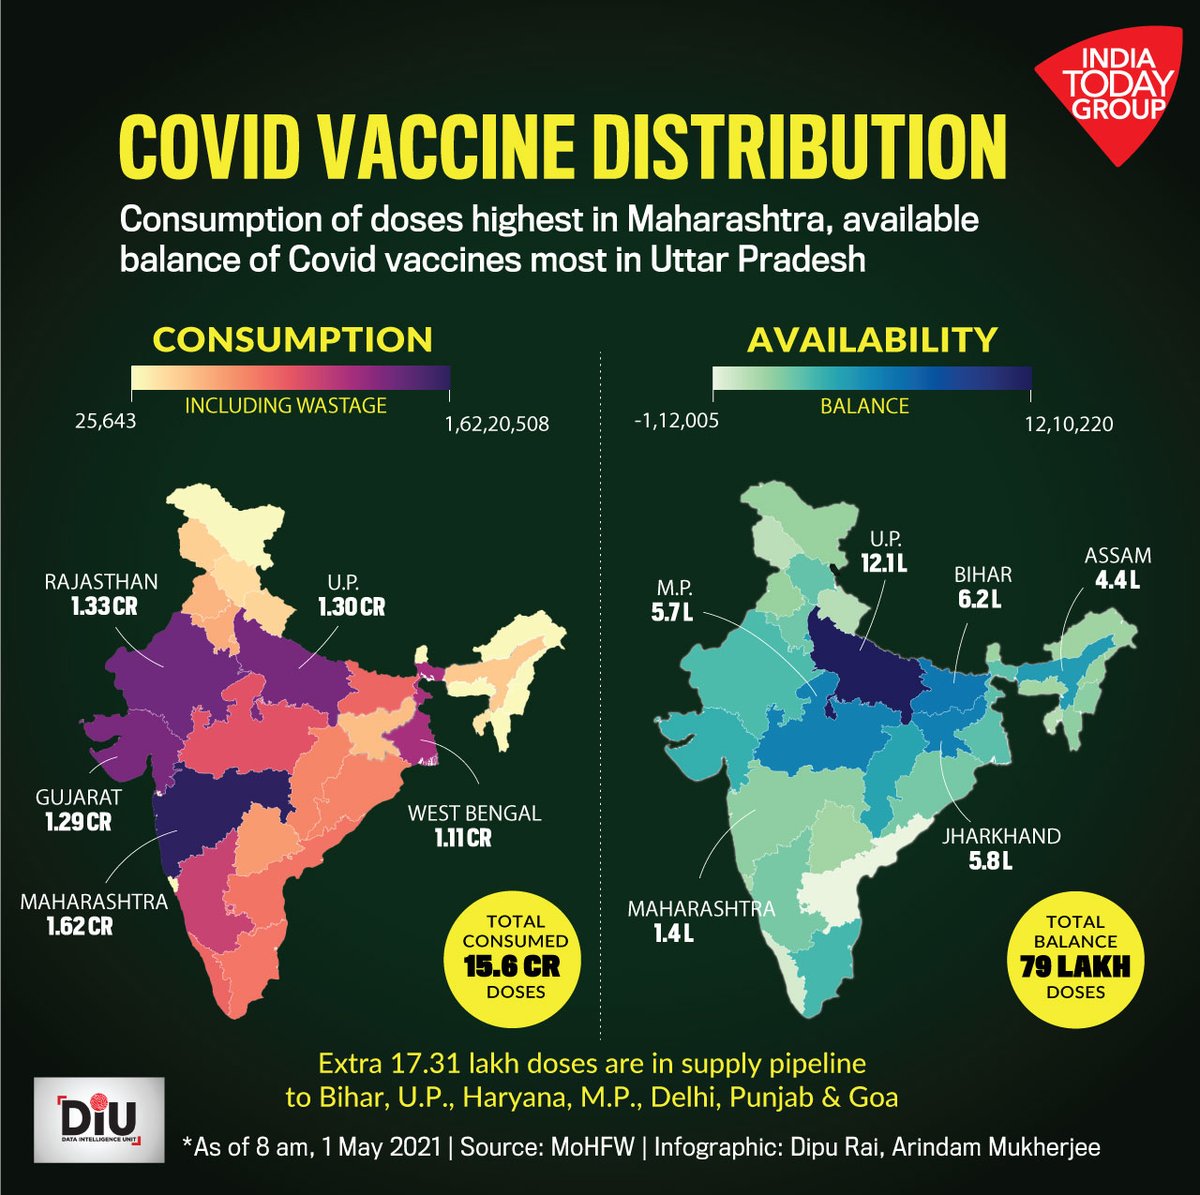 India has consumed more than 15 crore #CoronaVaccine doses while more than 79 lakh doses remain with states to be administered. Here is the state-wise #vaccinedistribution status on the day when vaccinations were opened up to the 18-44 years age group.
#DIU #Covid19India